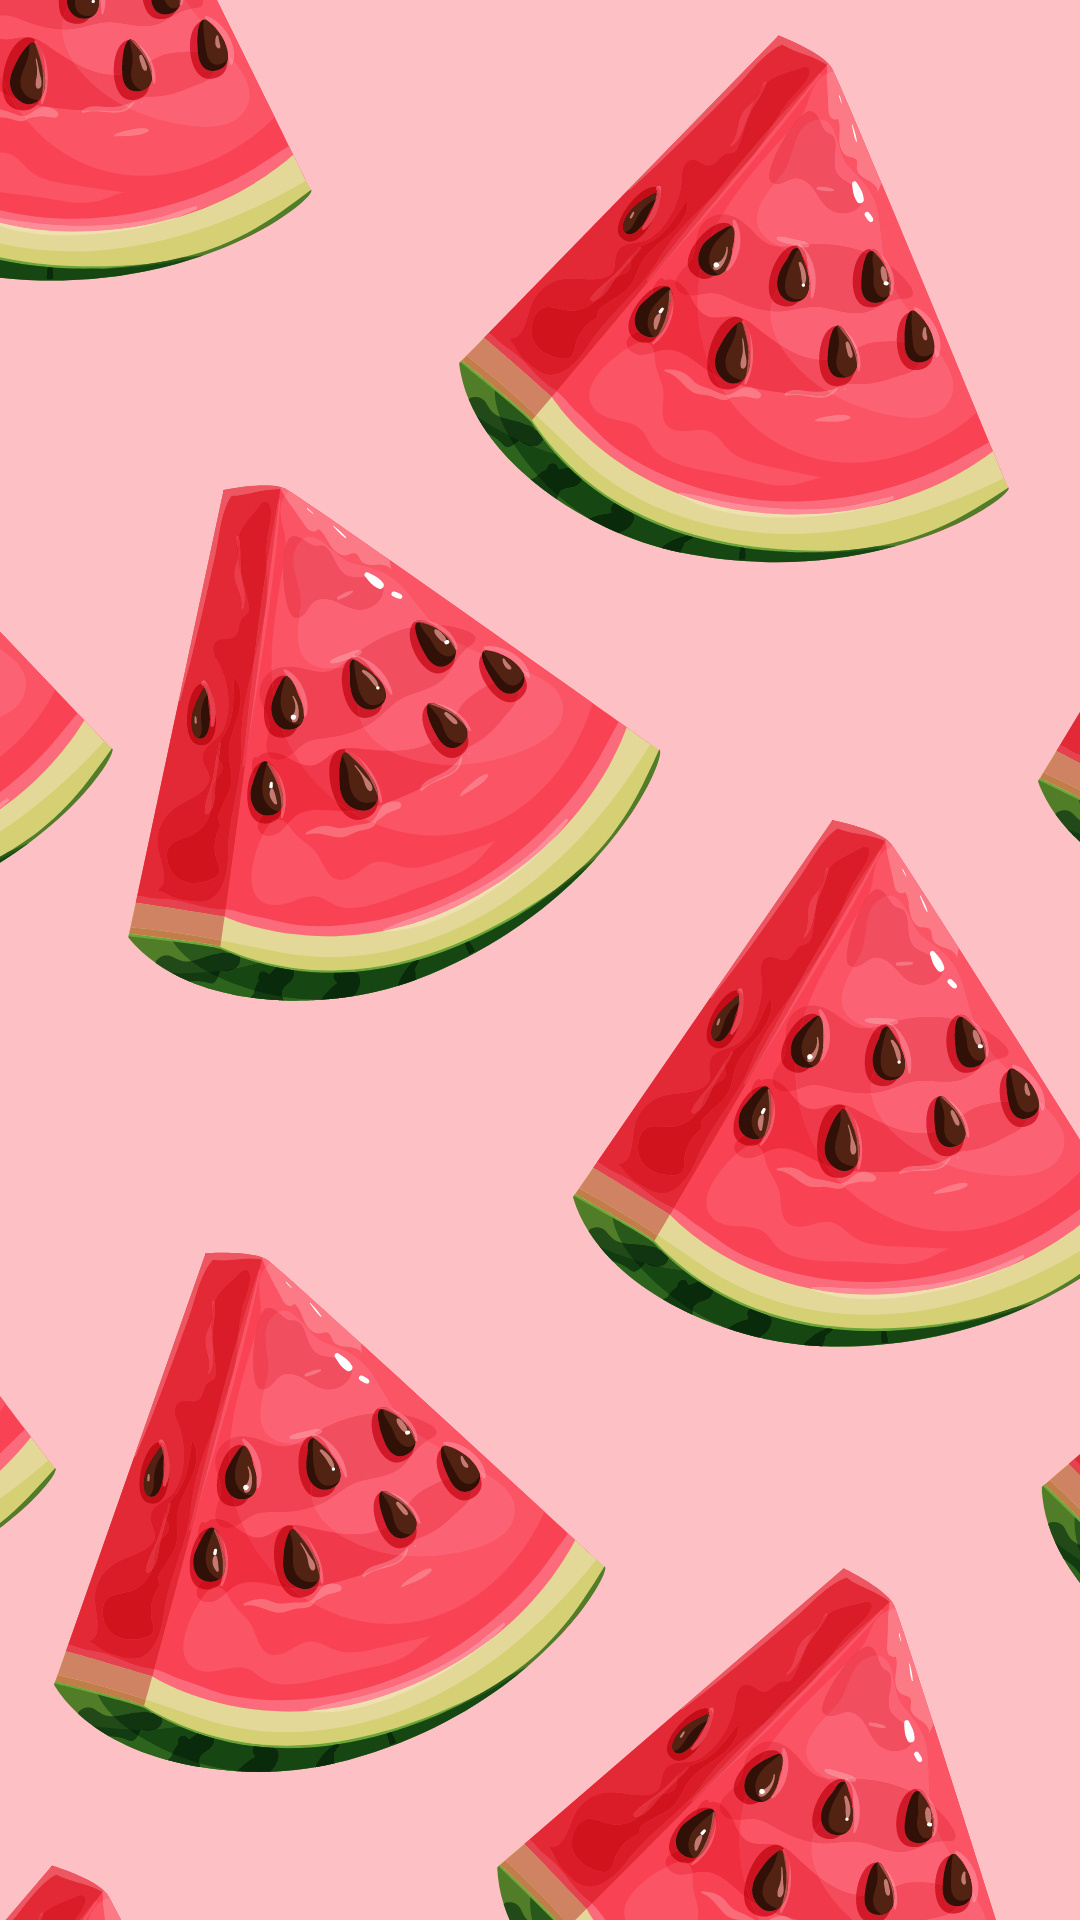 Watermelon: A rich source of potassium that can regulate nerve function. 1080x1920 Full HD Wallpaper.